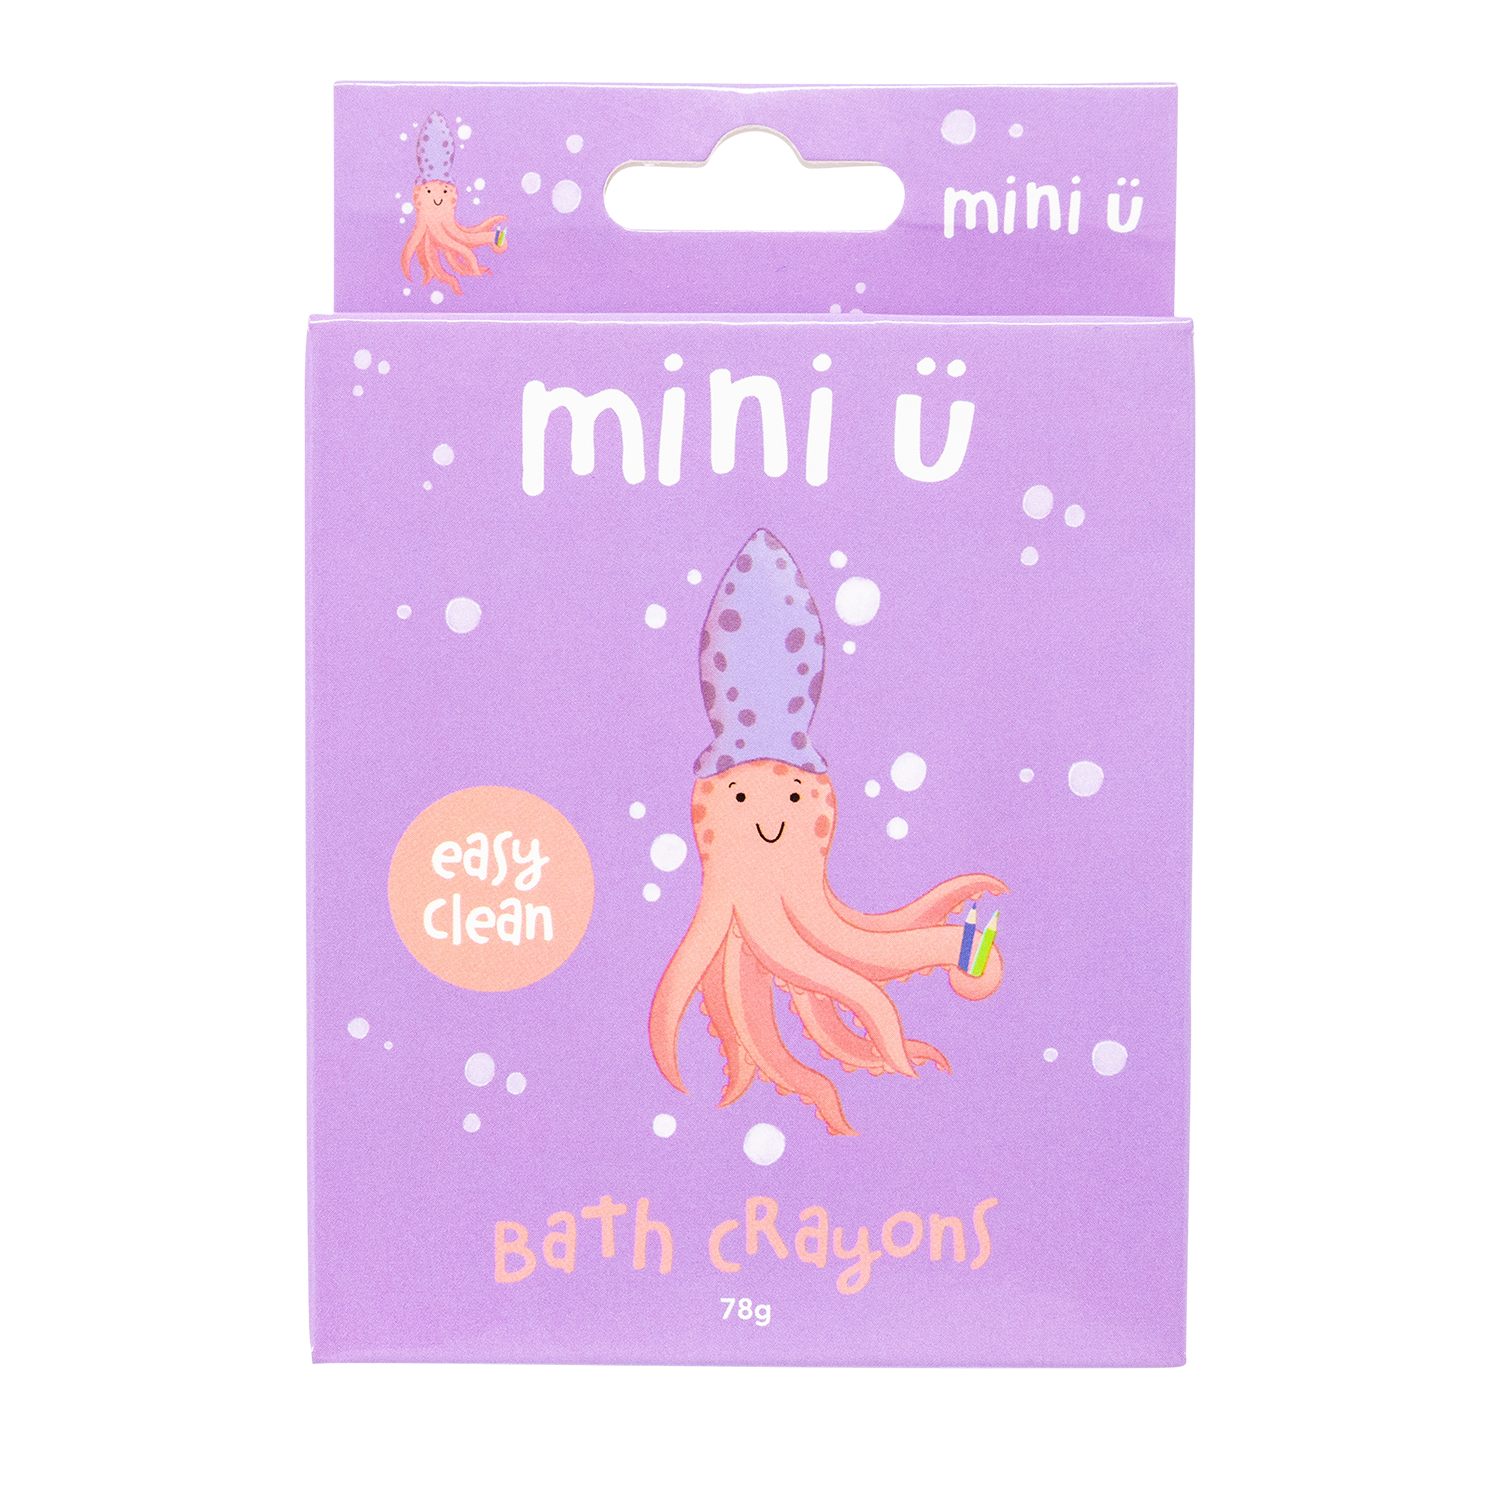 bath crayons for kids box front